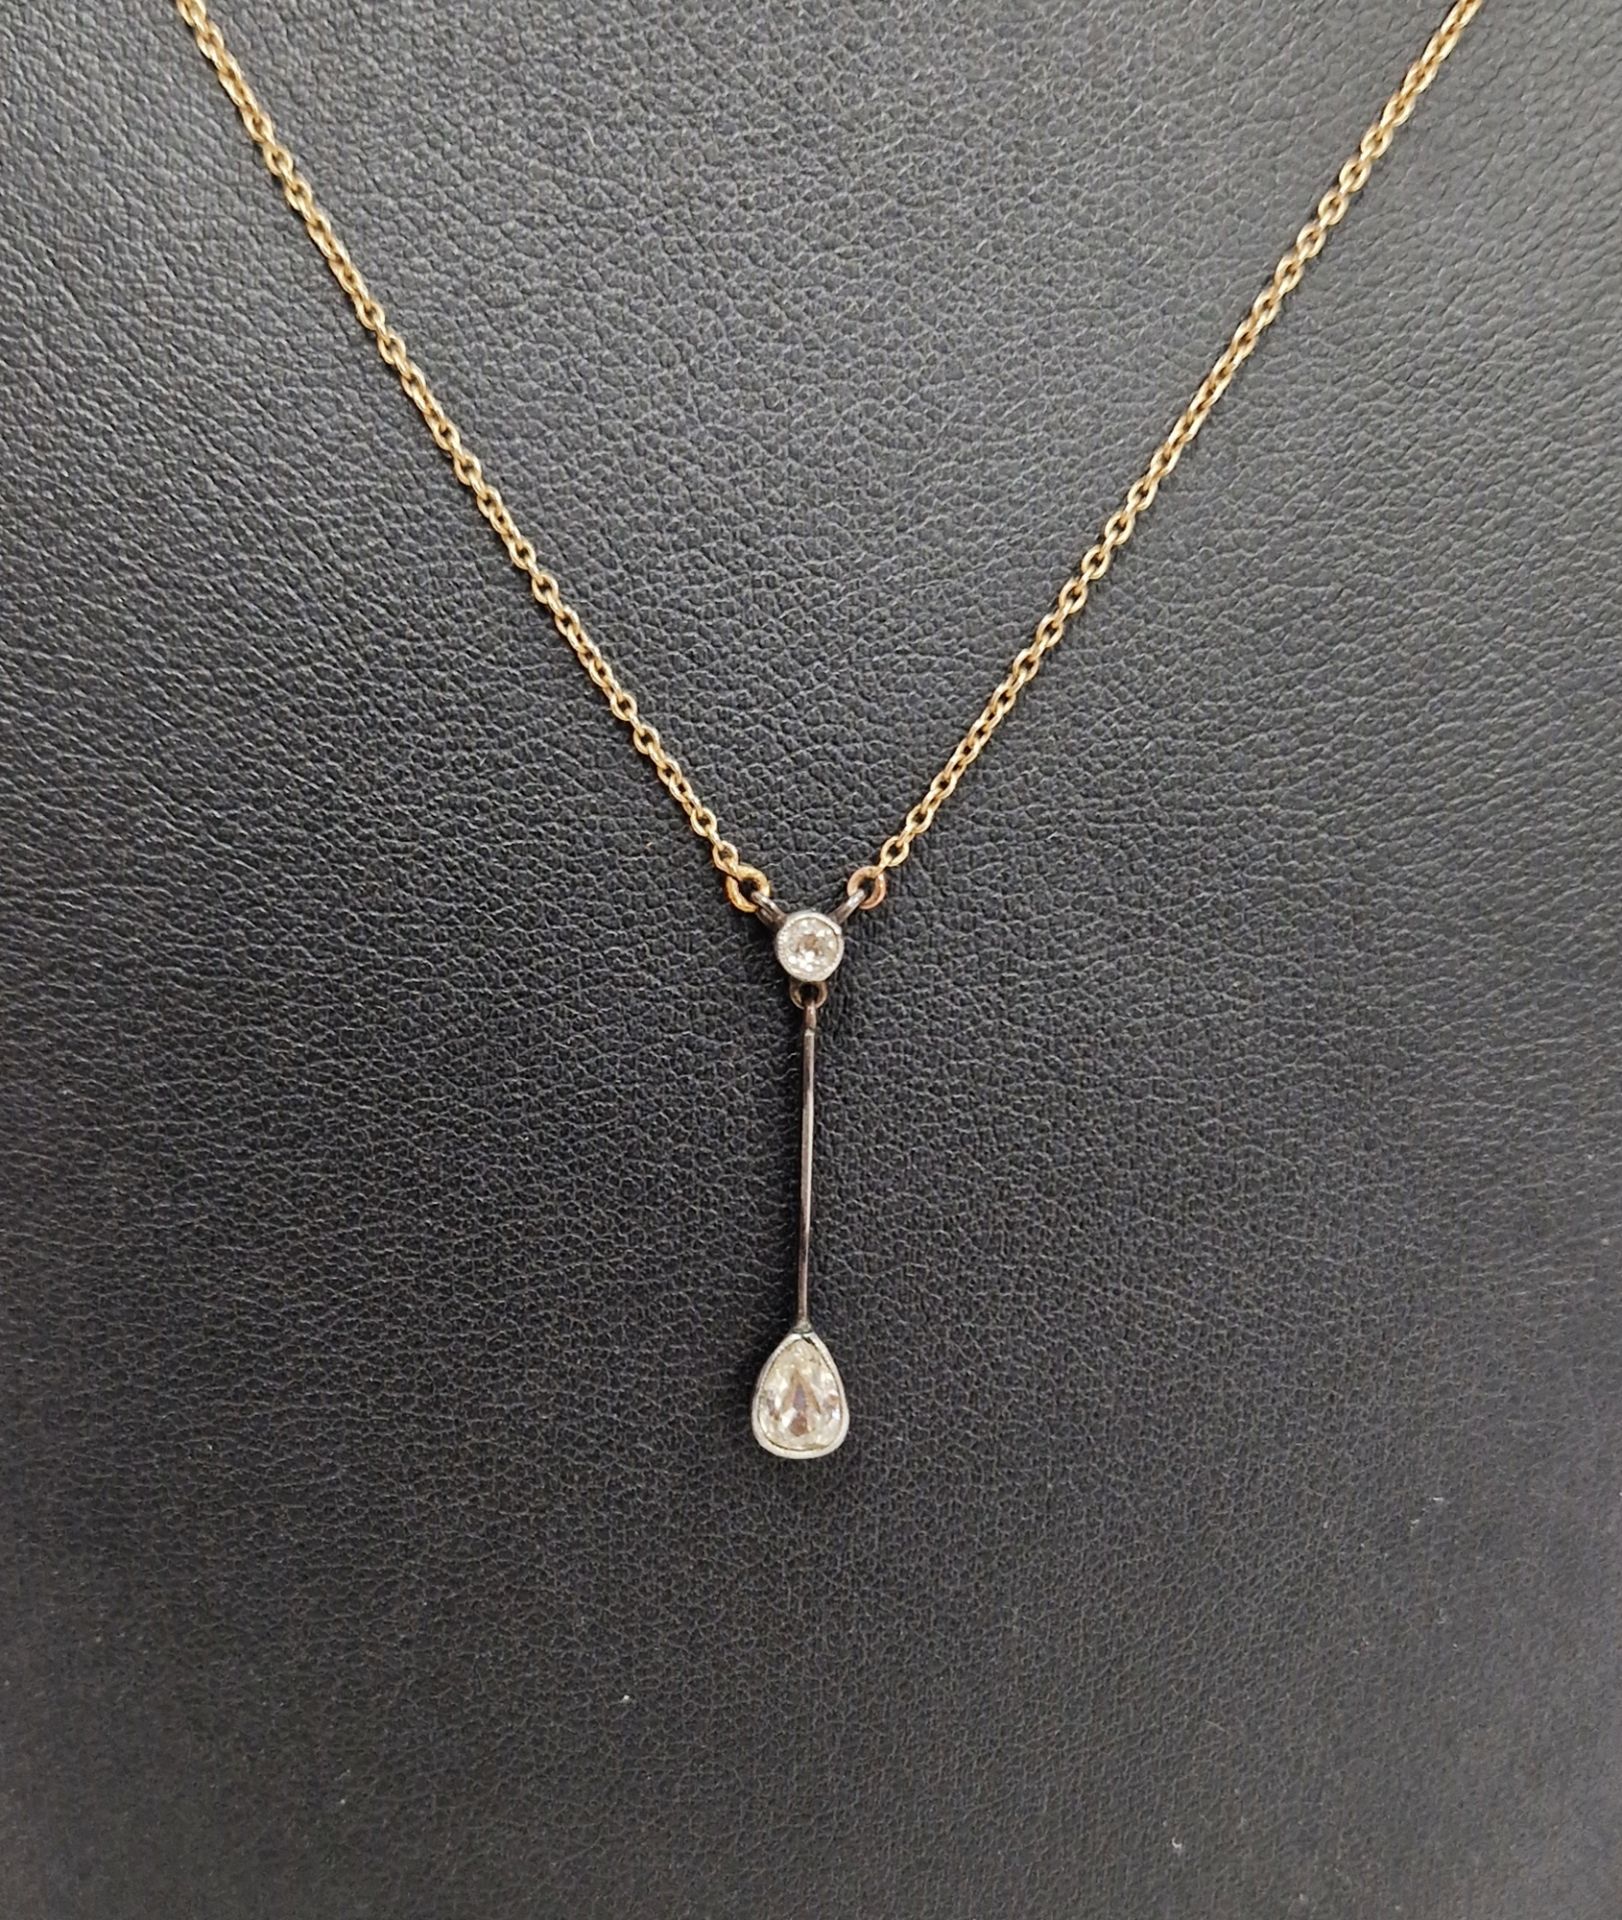 9ct white and yellow gold and diamond pendant necklace having circular diamond collet set above